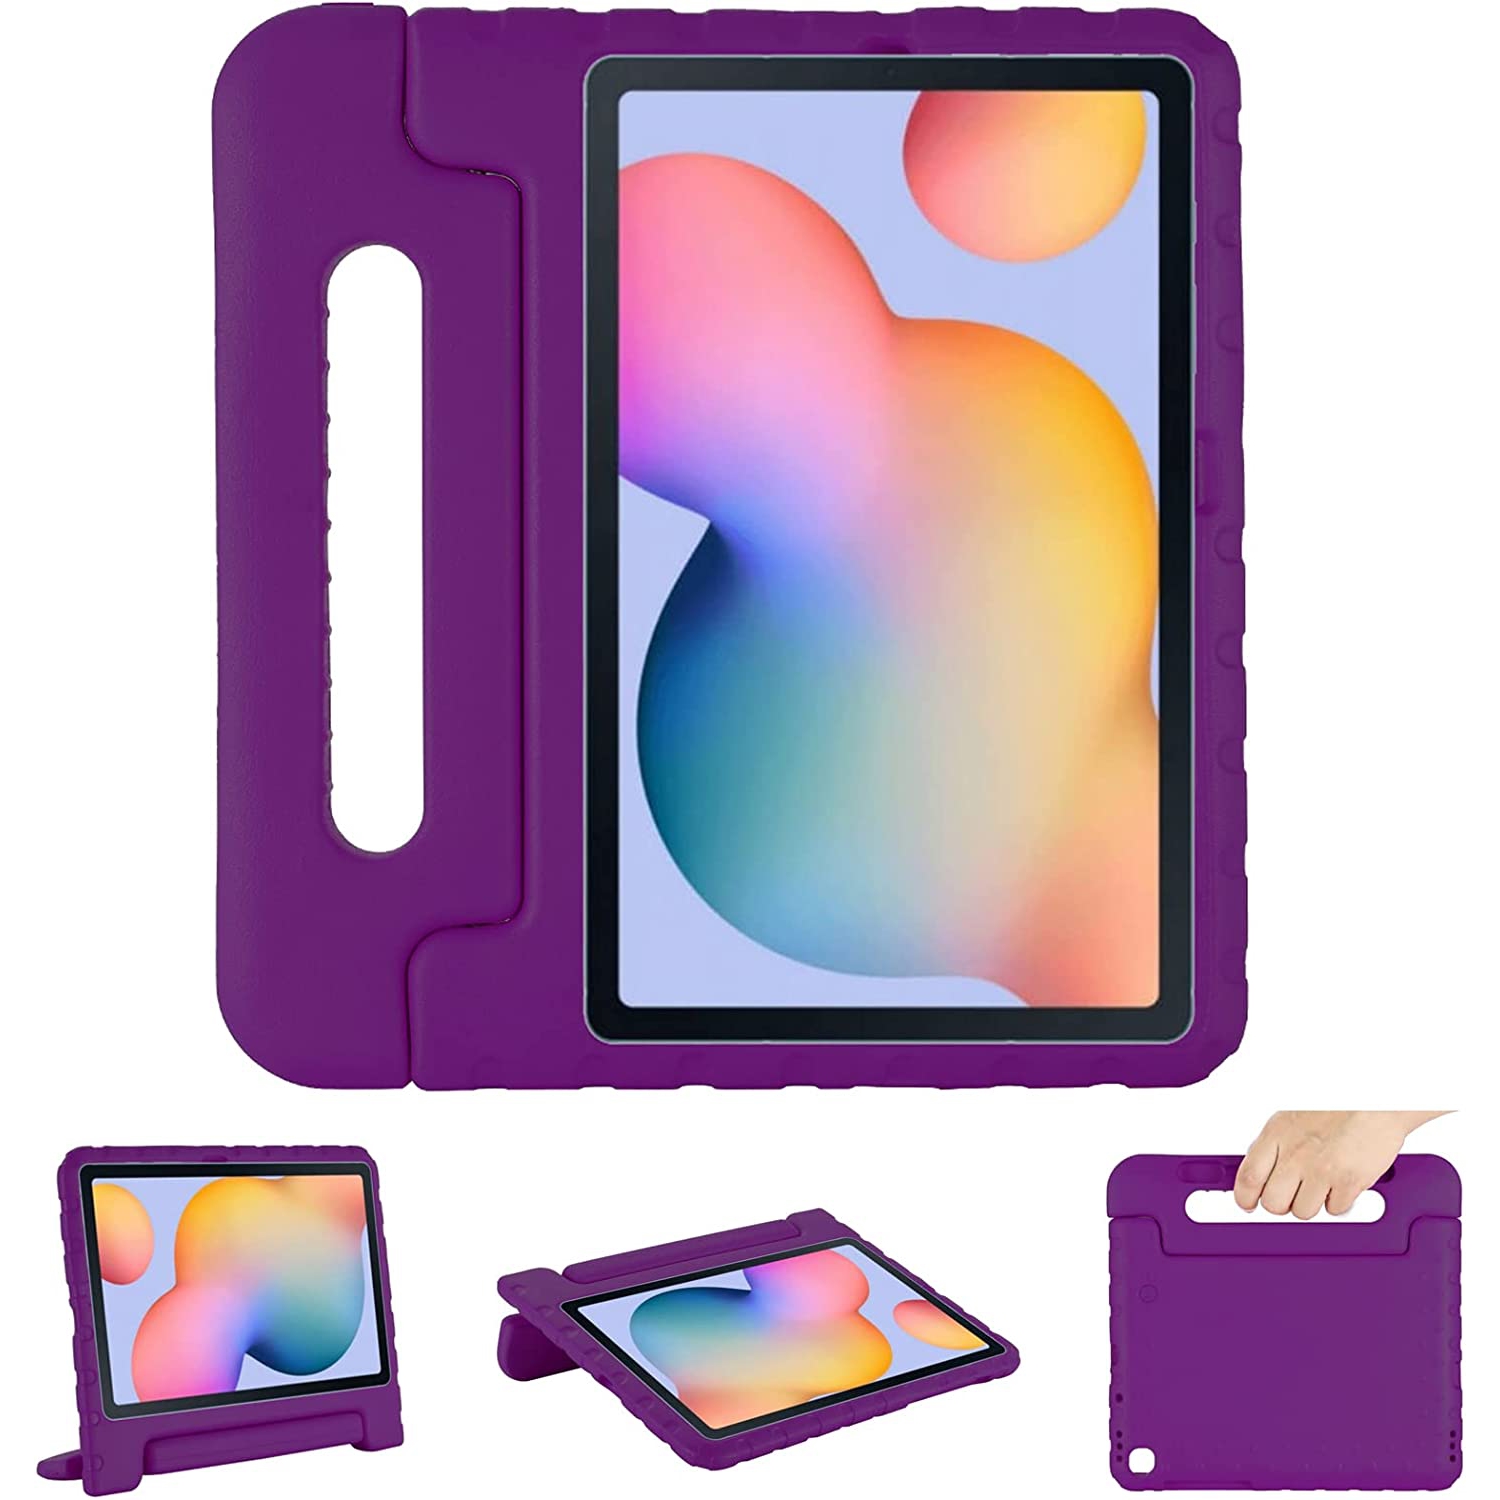 F Shockproof Case for Samsung Galaxy Tab S6 Lite 10.4 inch 2022/2020 Model (SM-P610/P613/P615/P619), Lightweight Stand Handle Kids Case with Pencil Holder for Galaxy Tab S6 Lite 10